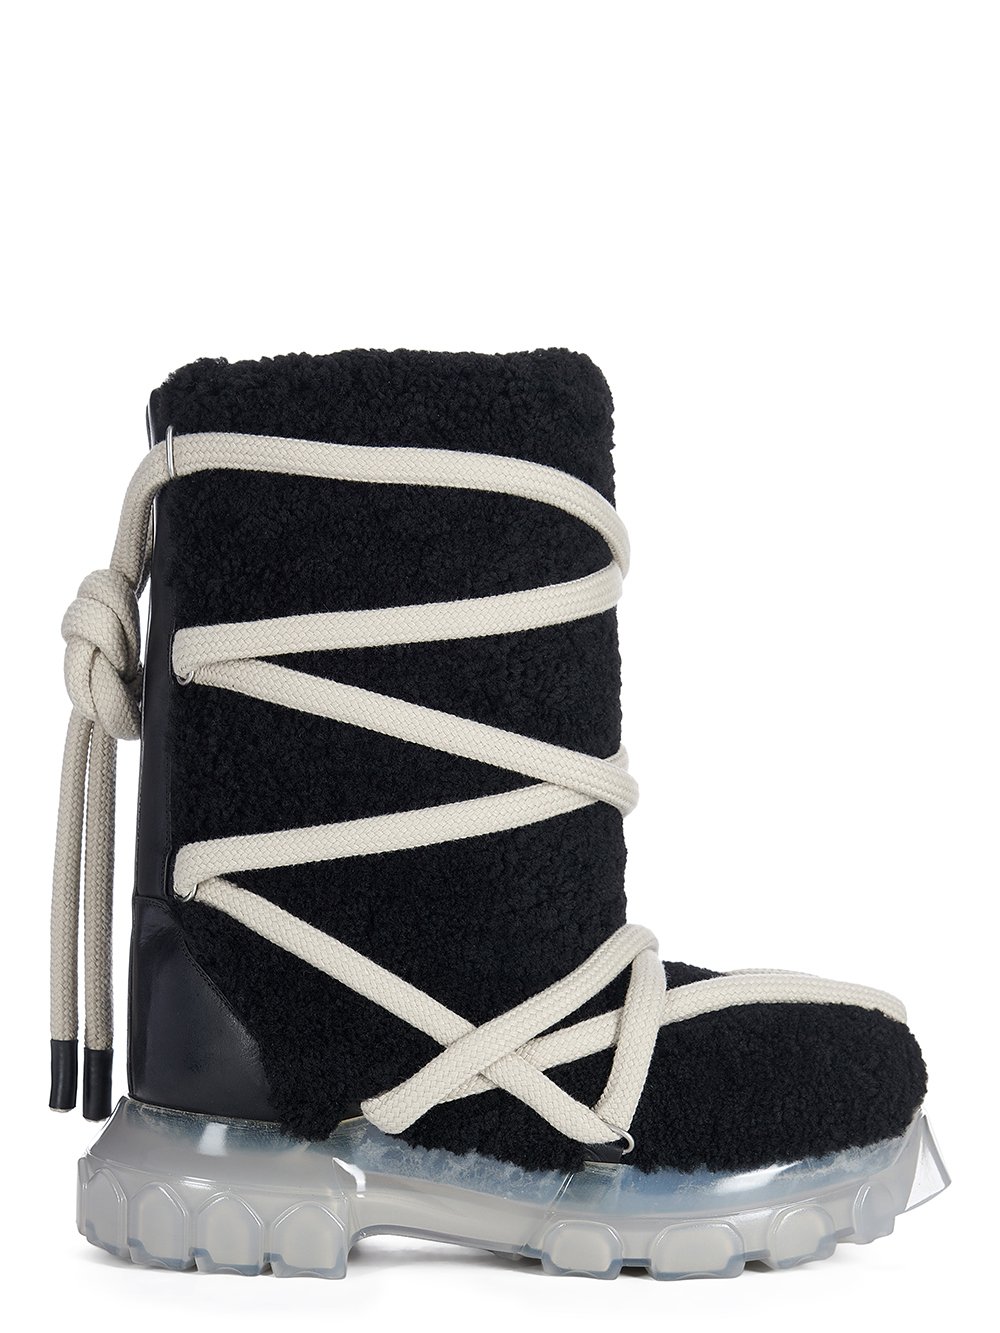 RICK OWENS FW23 LUXOR LUNAR TRACTOR IN BLACK BUTTER LAMB SHEARLING